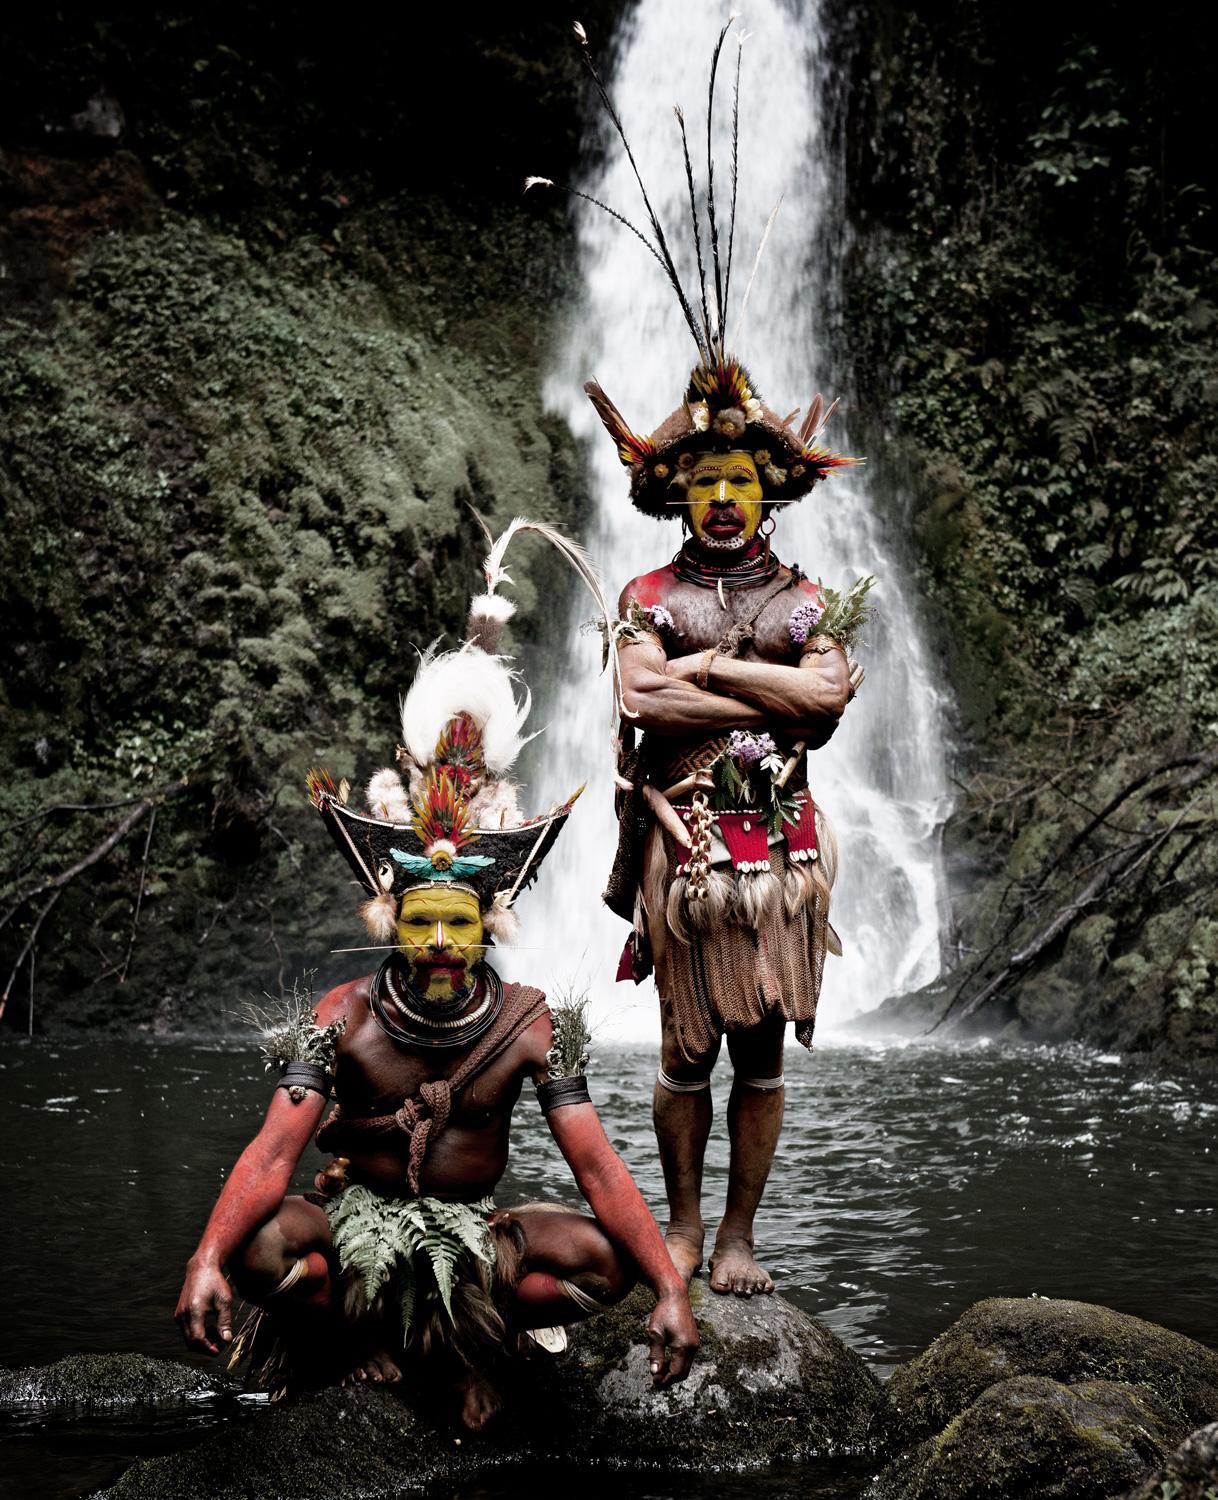 "XV 465 - Huli Wig men - Ambua Falls, Tari Valley - Papua New Guinea, 2010

Papua is where we started our two-month trip in Oceania. As a region it’s a lot easier to travel through than New Guinea, because it’s part of Indonesia and therefore a lot